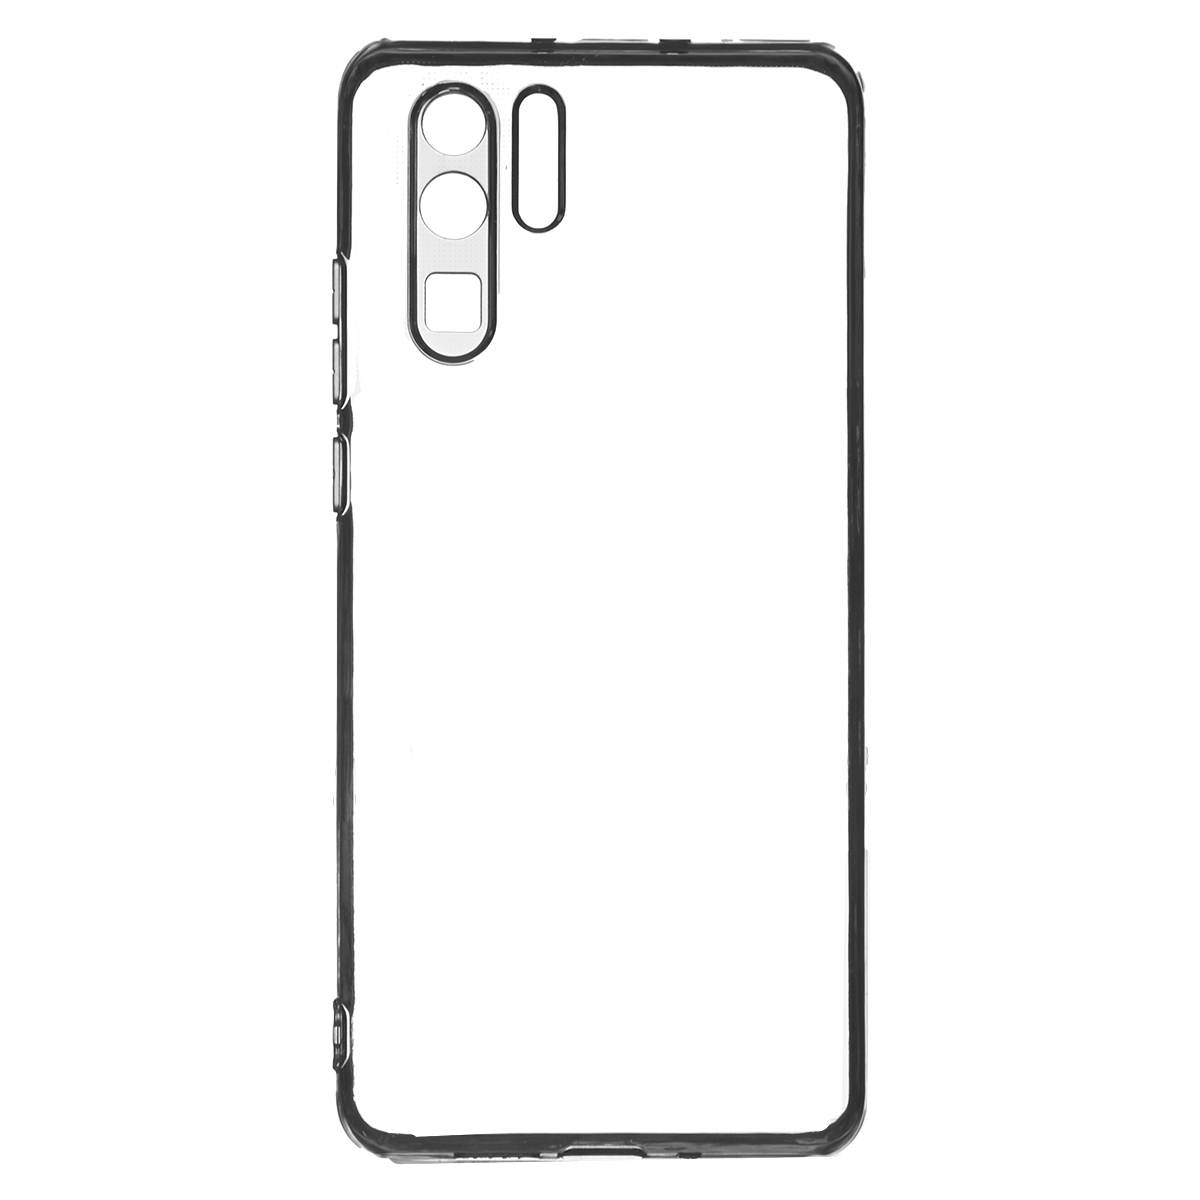 Tpu clear solid for p30 pro